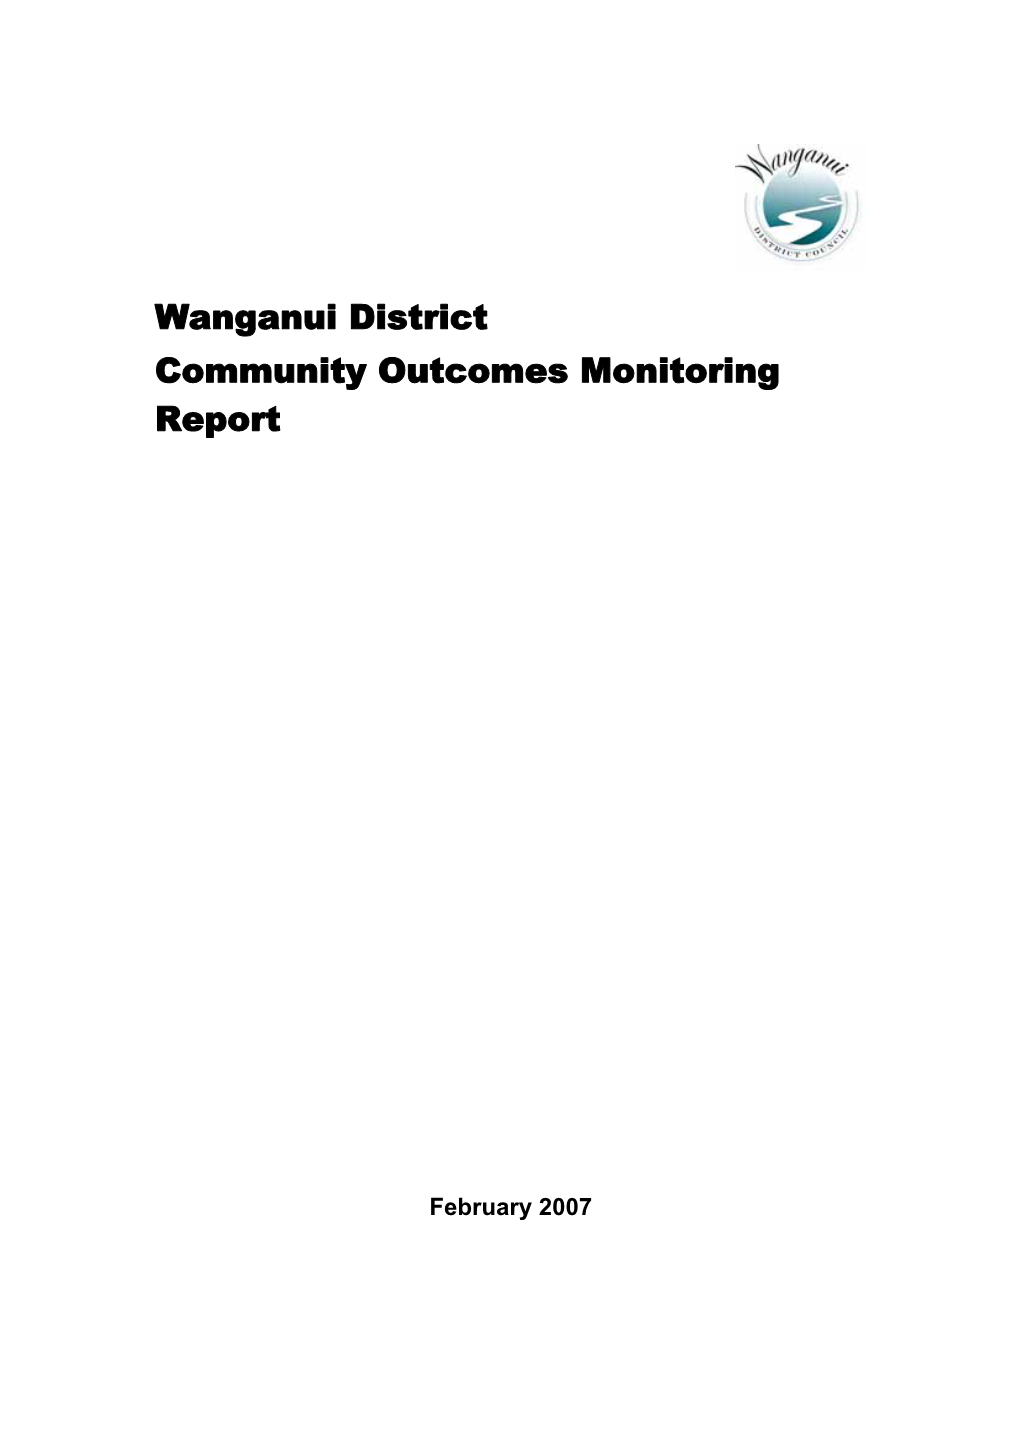 Wanganui District Community Outcomes Monitoring Report